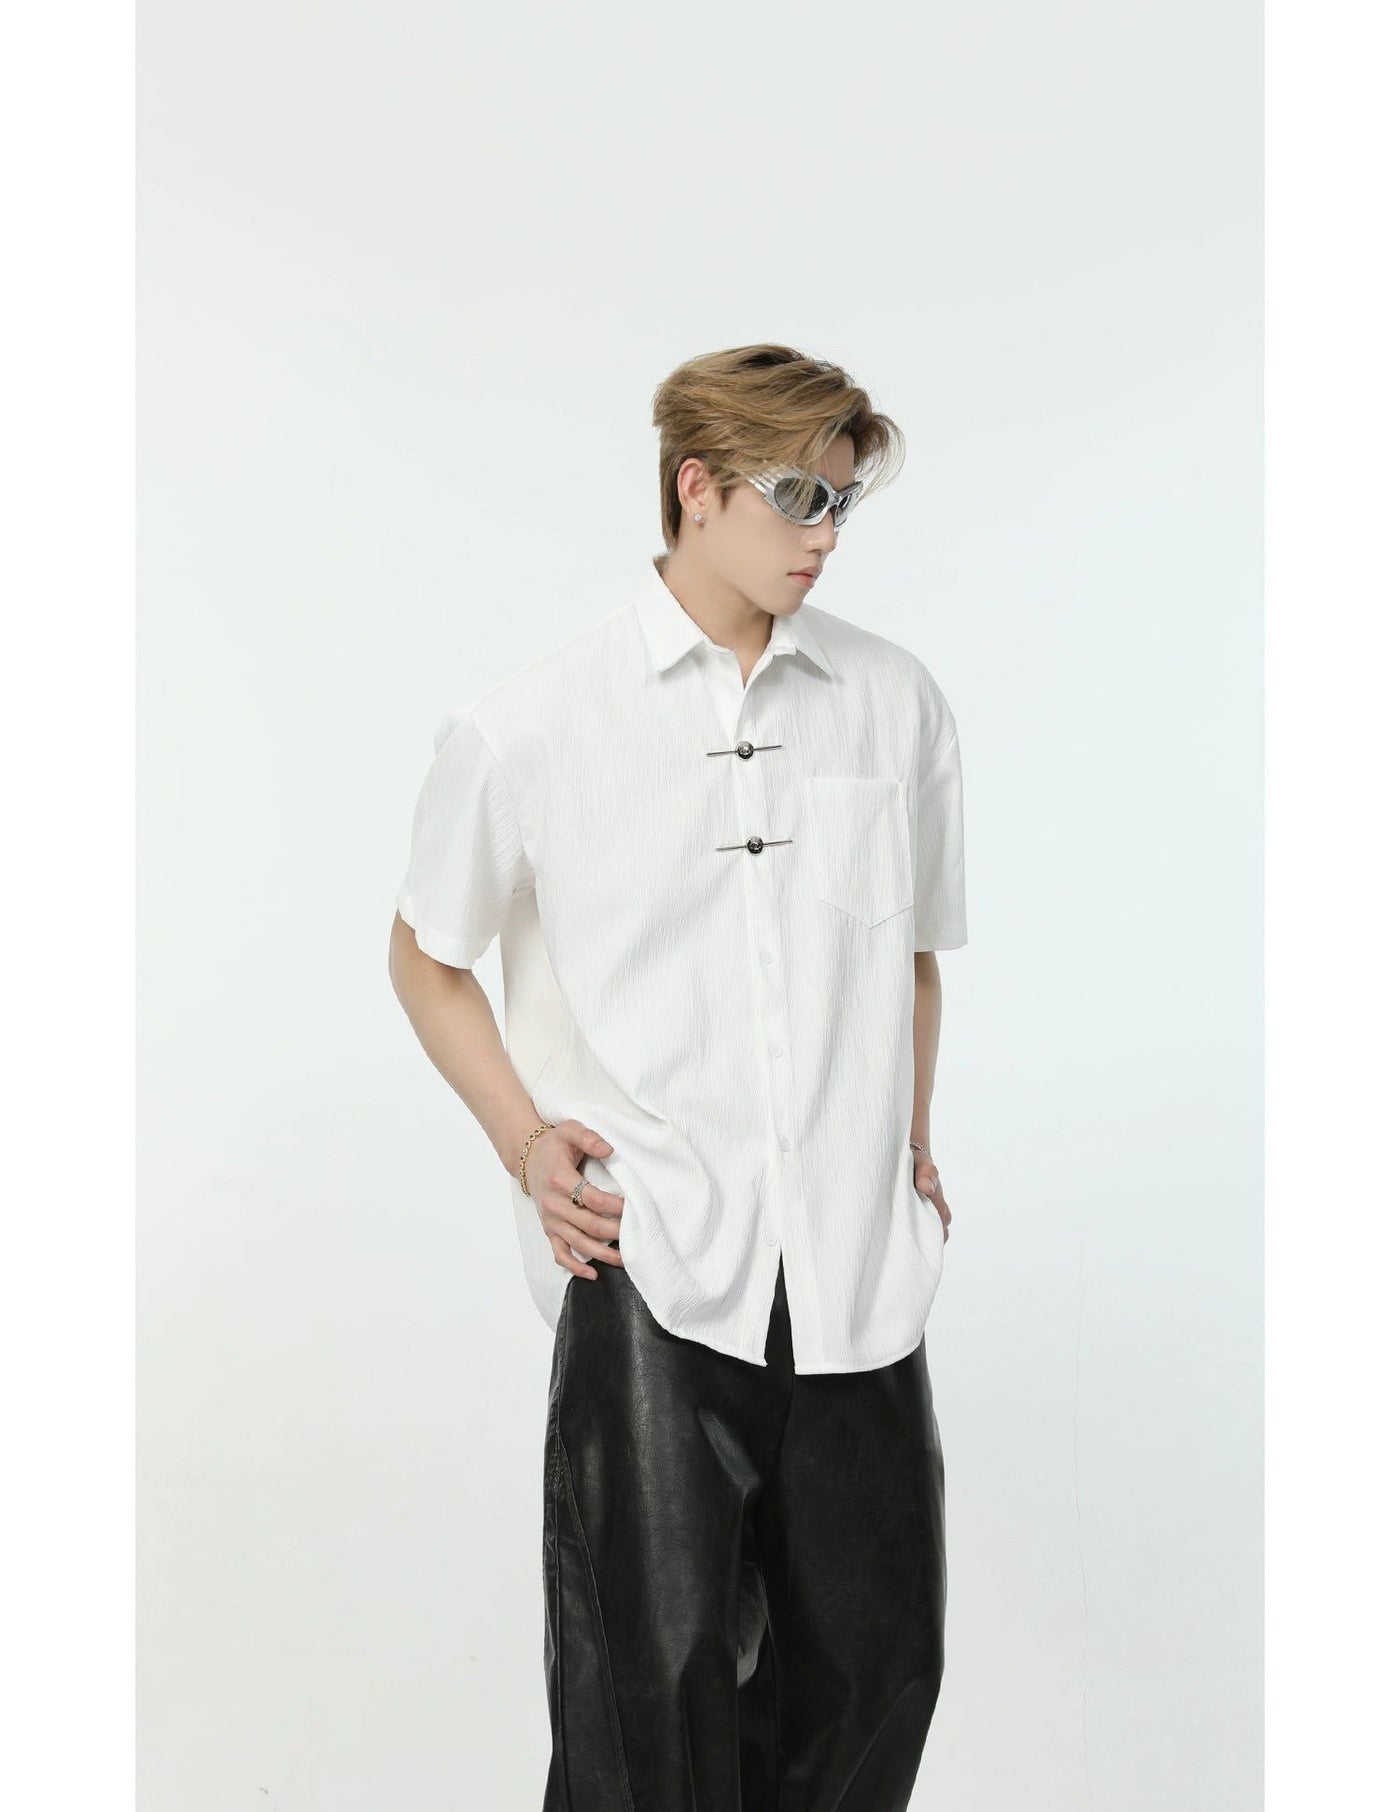 Asian Style Link Shirt Korean Street Fashion Shirt By Turn Tide Shop Online at OH Vault